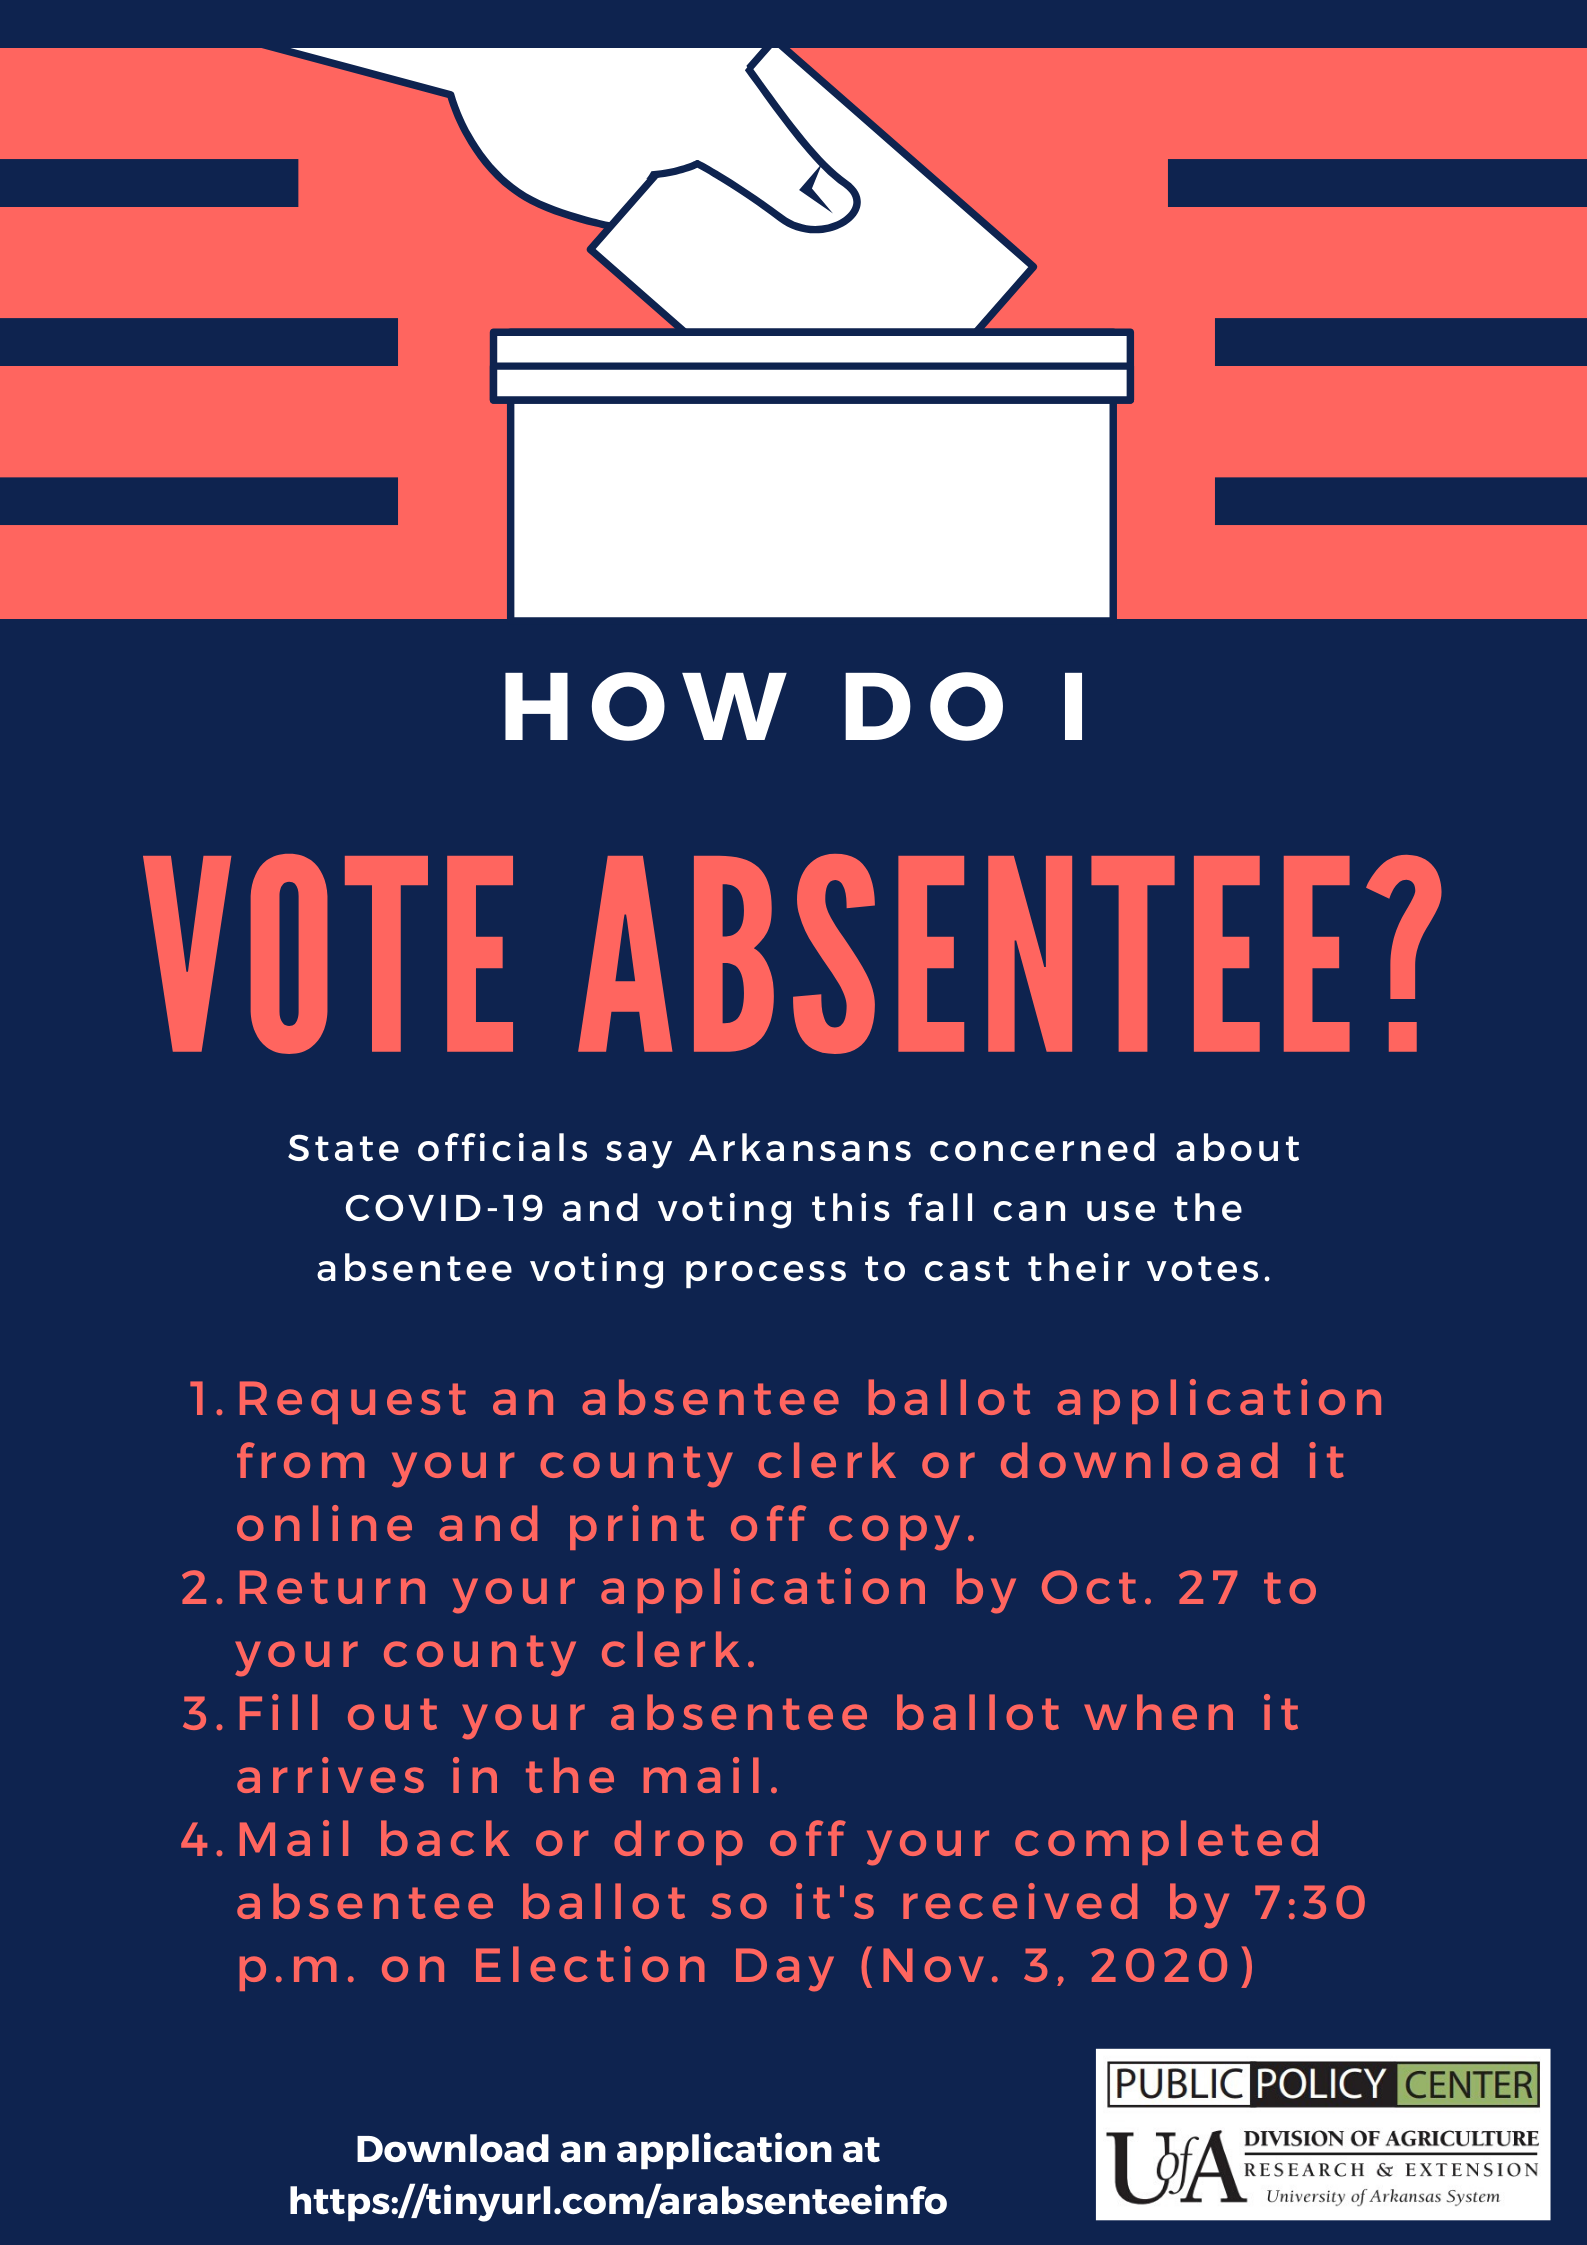 Graphic showing steps of applying for absentee ballot in Arkansas